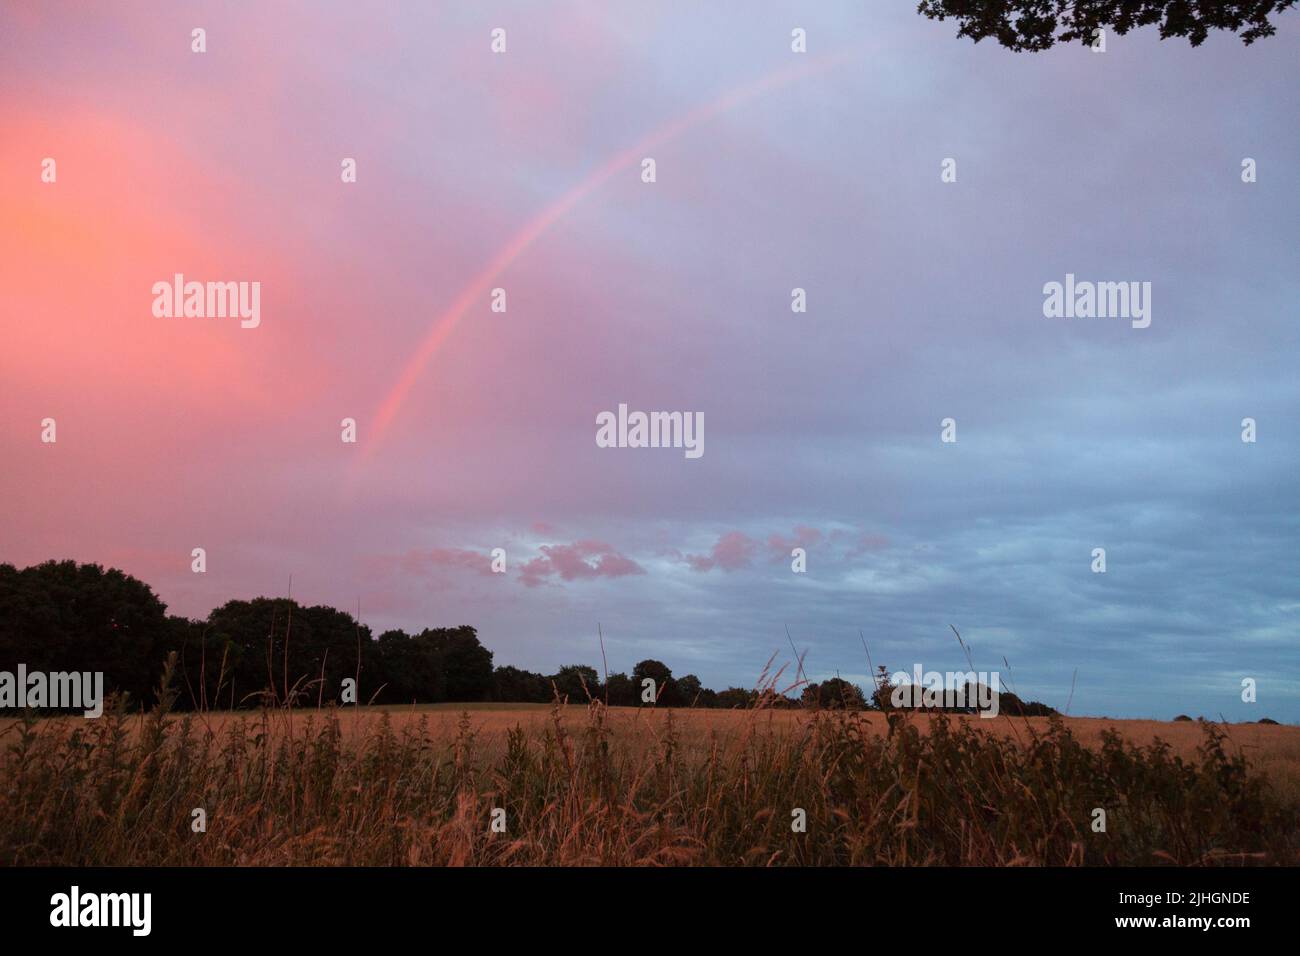 A unique pink sky with rainbow in the countryside Stock Photo